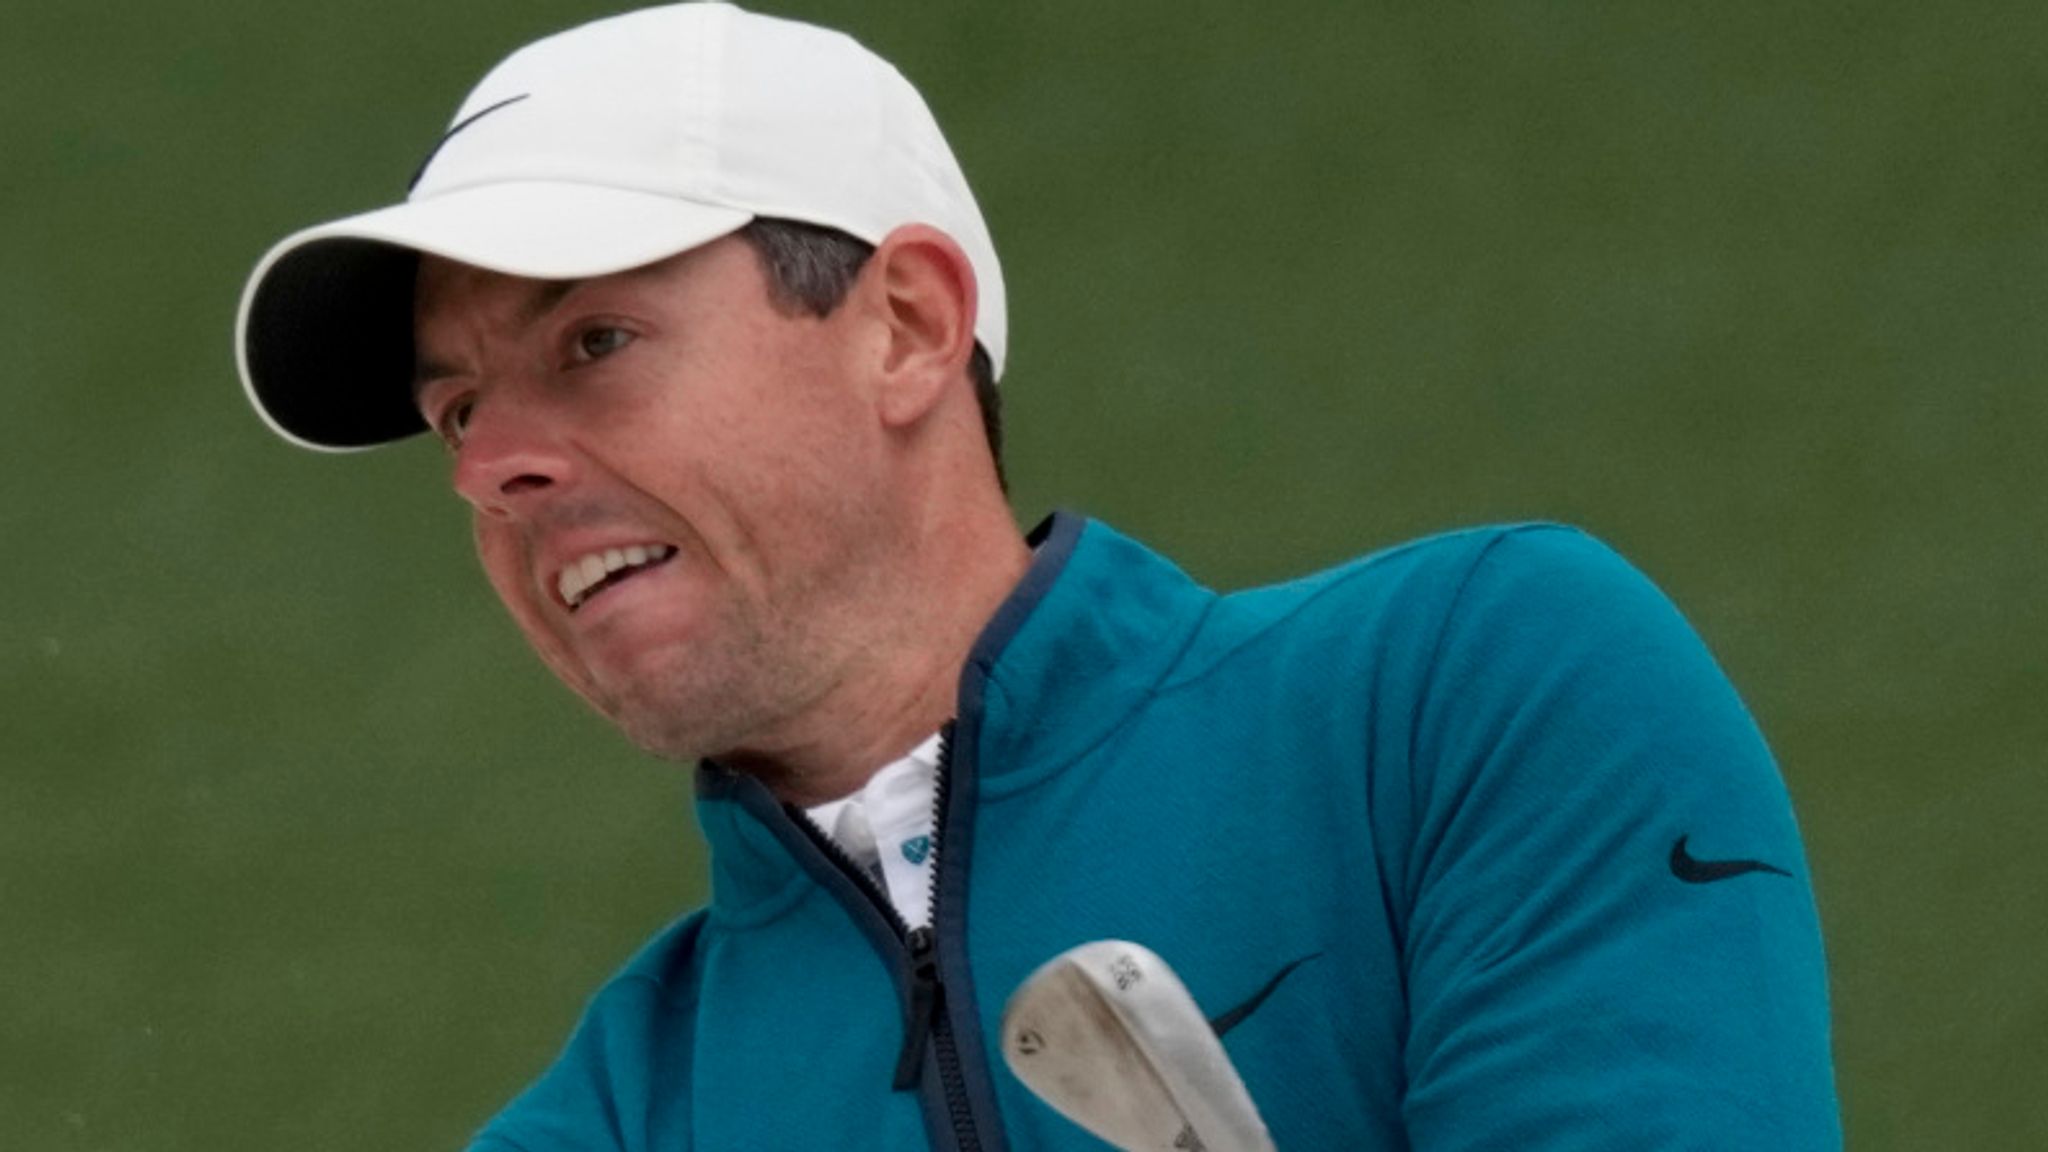 The Masters: Rory McIlroy targets late top-10 push at Augusta National  after third-round 71 | Golf News | Sky Sports